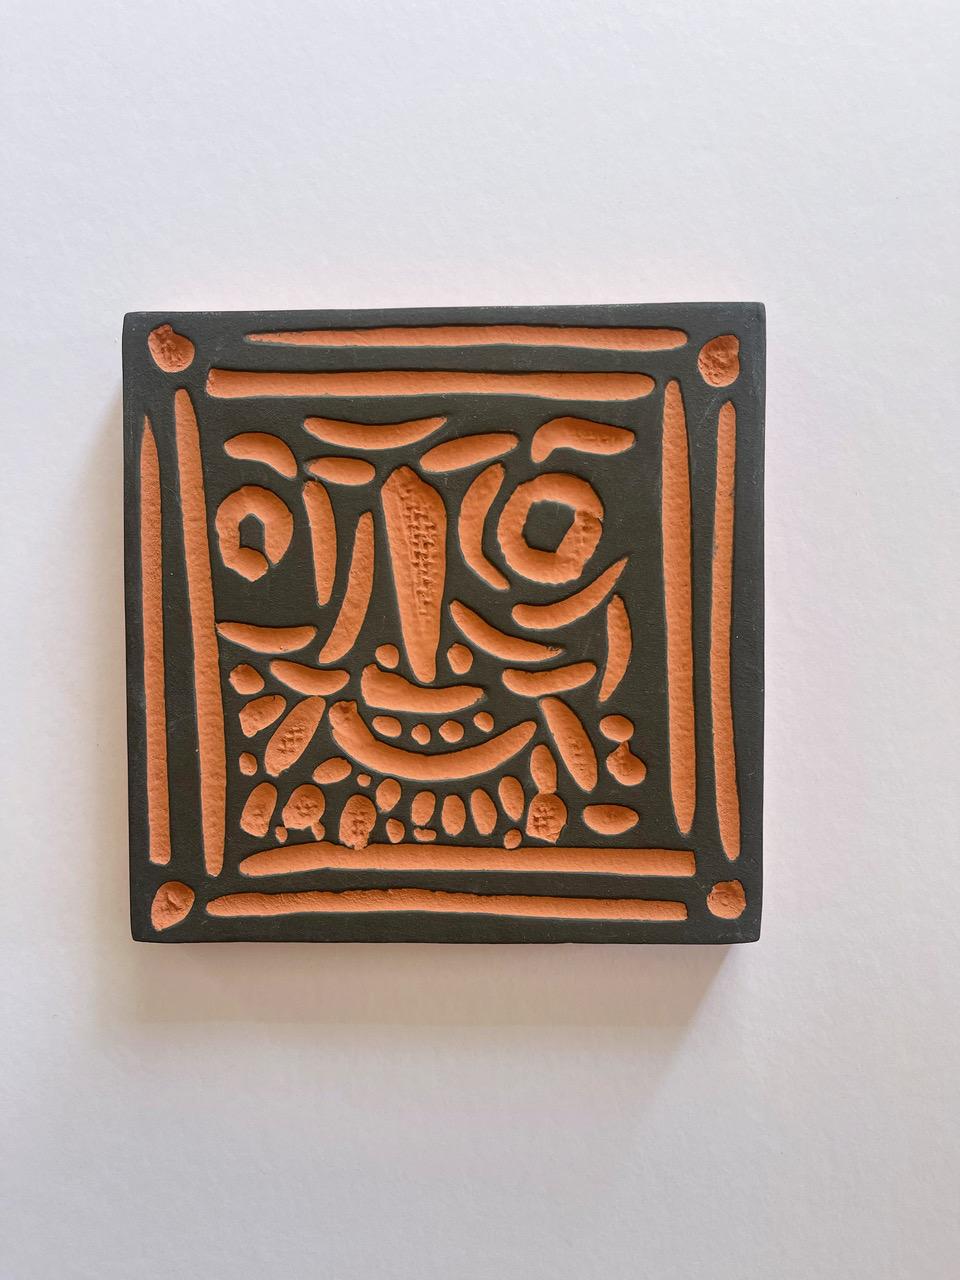 Pablo Picasso tile 'Little bearded Face' created in 1968 December, 1969 January, red earthenware clay, square sized 17 cm x 17 cm.
printed and numbered 26, 200 copies produced

Condition: Mint
First Hand, Swiss collector